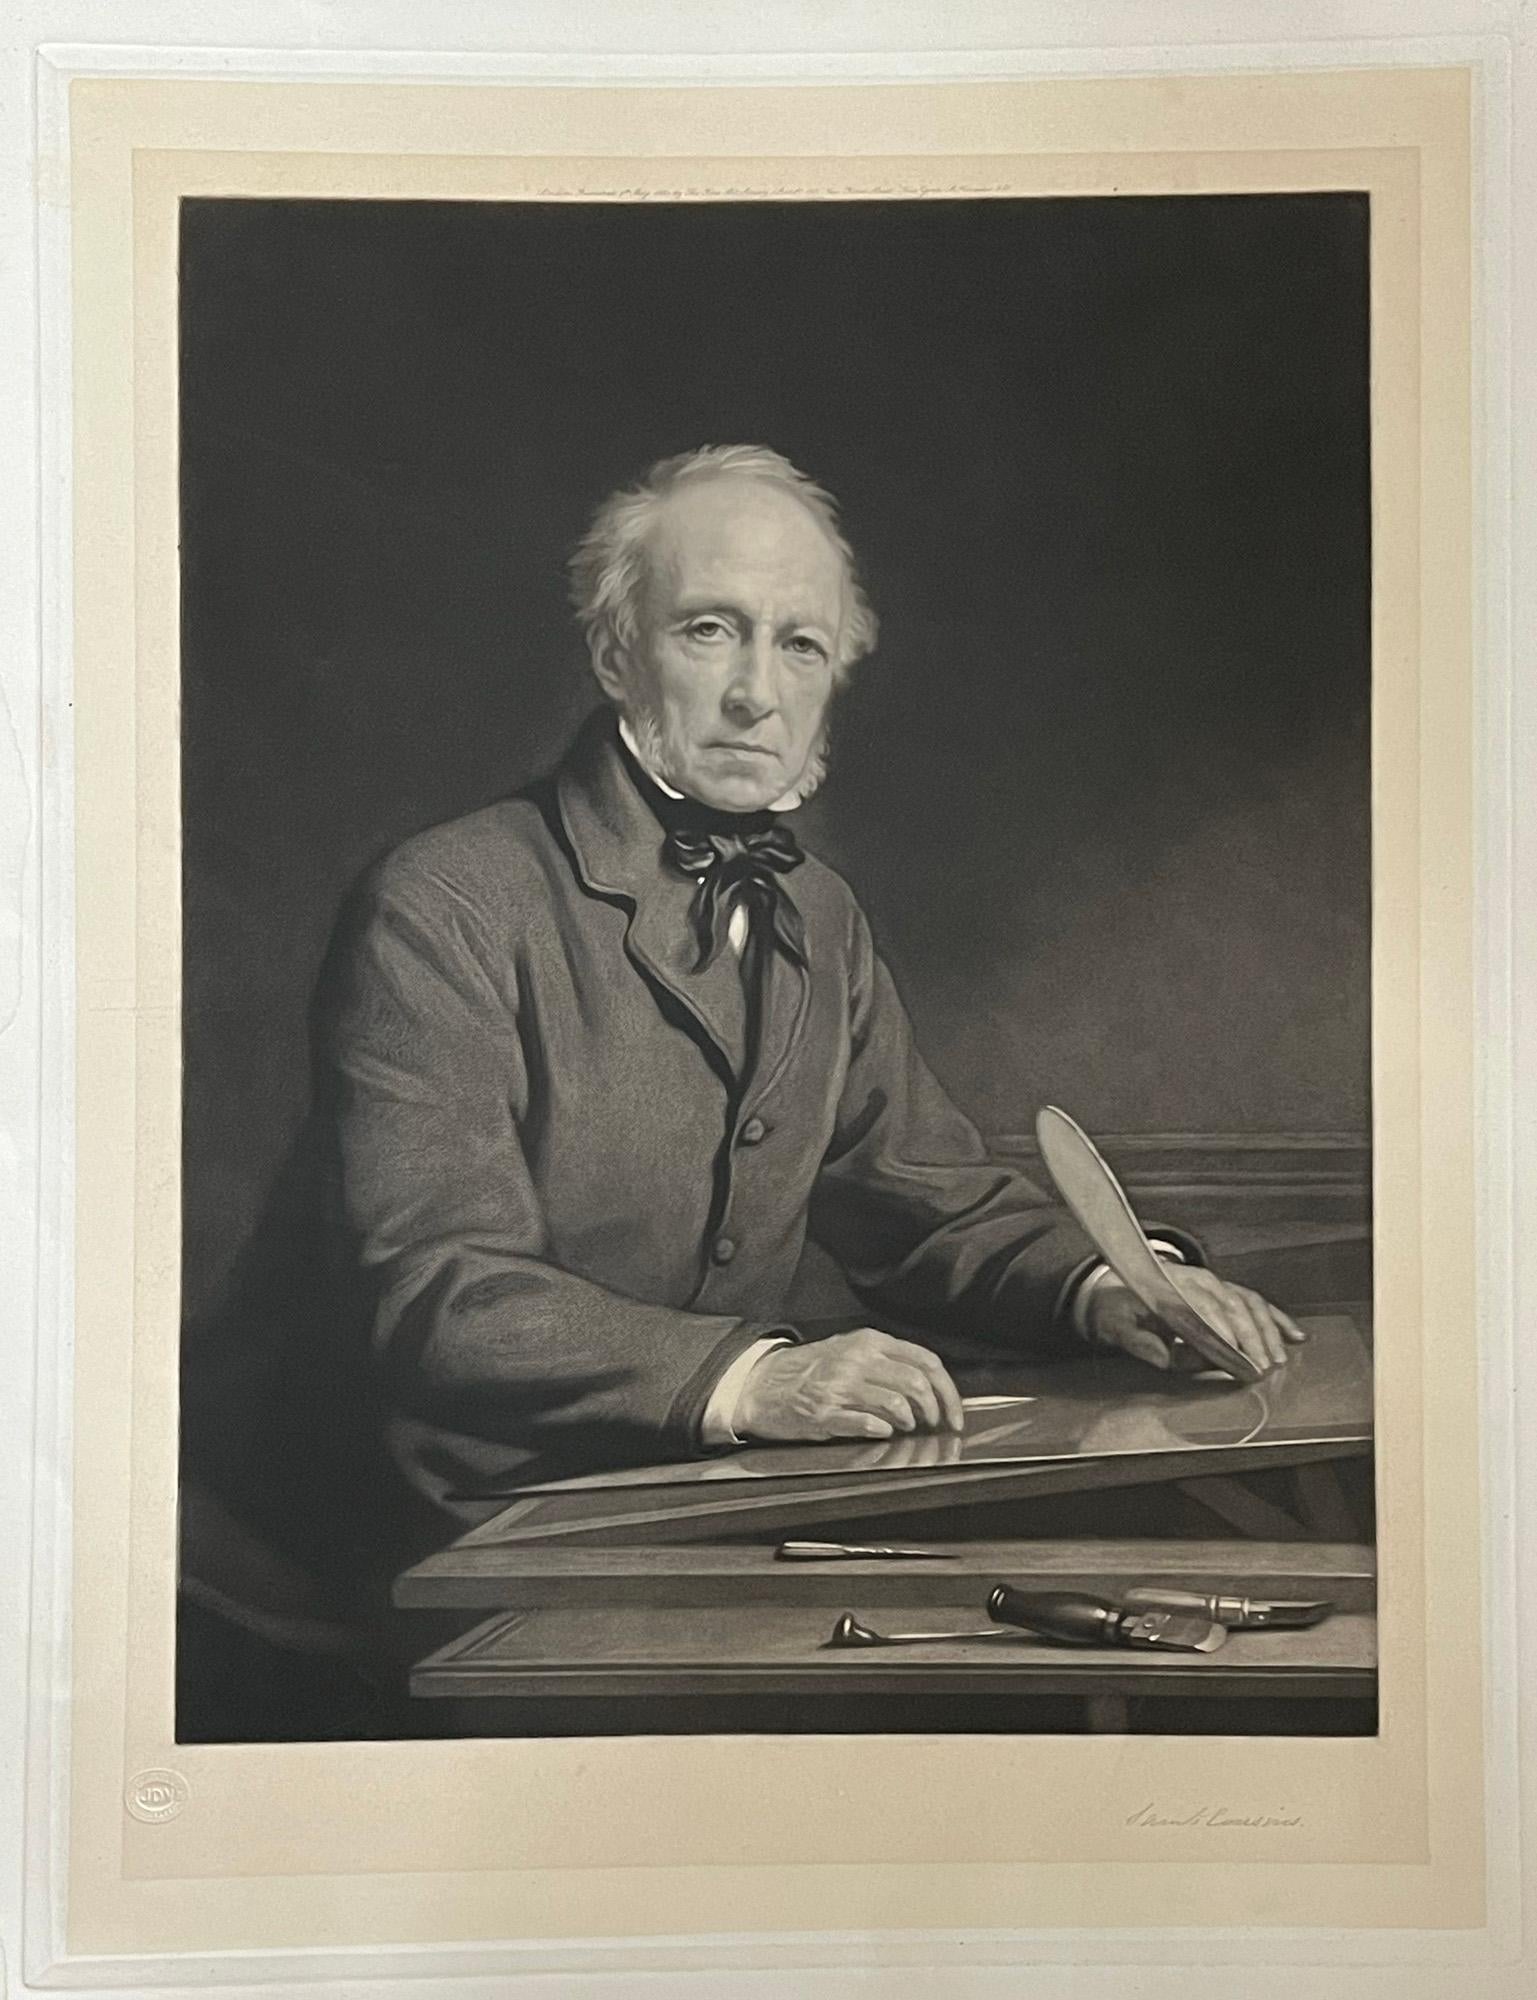 Samuel Cousins

Mezzotint, by Edwin Long after Samuel Cousins (1801-1887). 1884. 

530mm by 405mm (platemark) 620mm by 495mm (sheet). 

India-laid proof before lettering, signed in pencil by Samuel Cousins. 

Blindstamp of Printsellers' Association